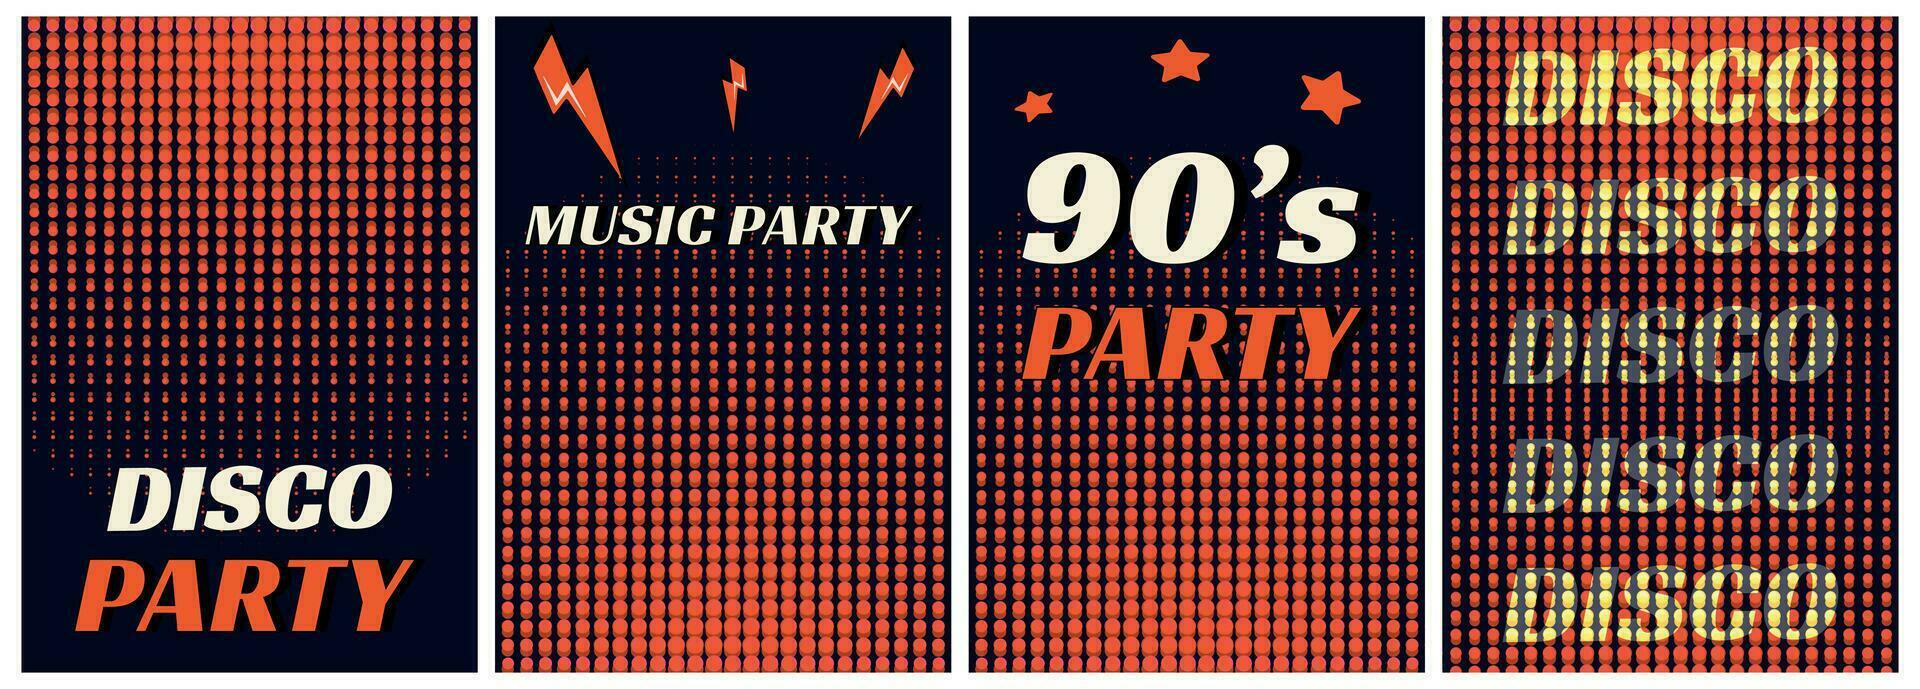 Retro 90s music party poster. Musical festival posters or flyers design template in retro style of 90s.Music disk 90s.Retro 90s Party Invitation Poster Template.Trendy typography cover vector design